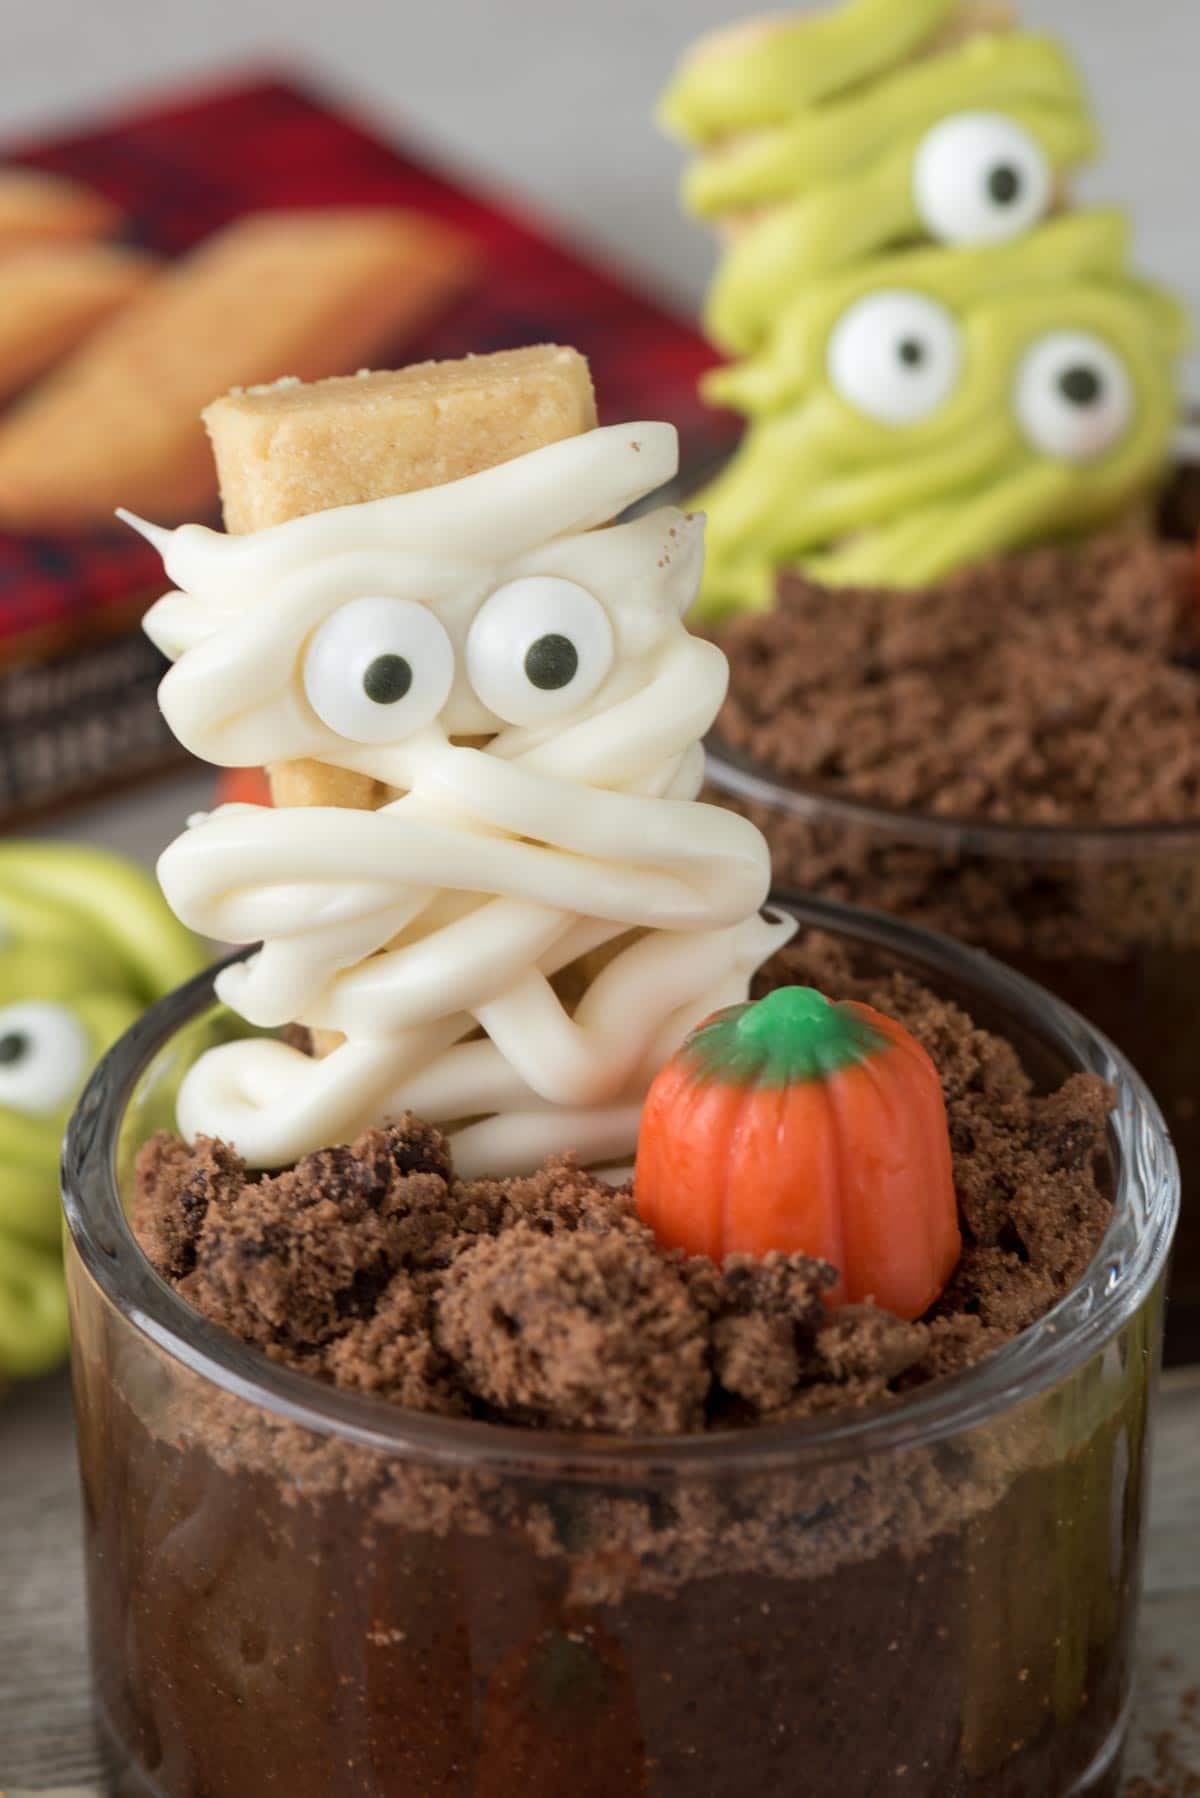 Easy Monster and Mummy Dirt Cups - make monsters and mummies out of shortbread cookies and melted candy! Stick them in an easy chocolate pudding dirt cup for a fun Halloween Treat.